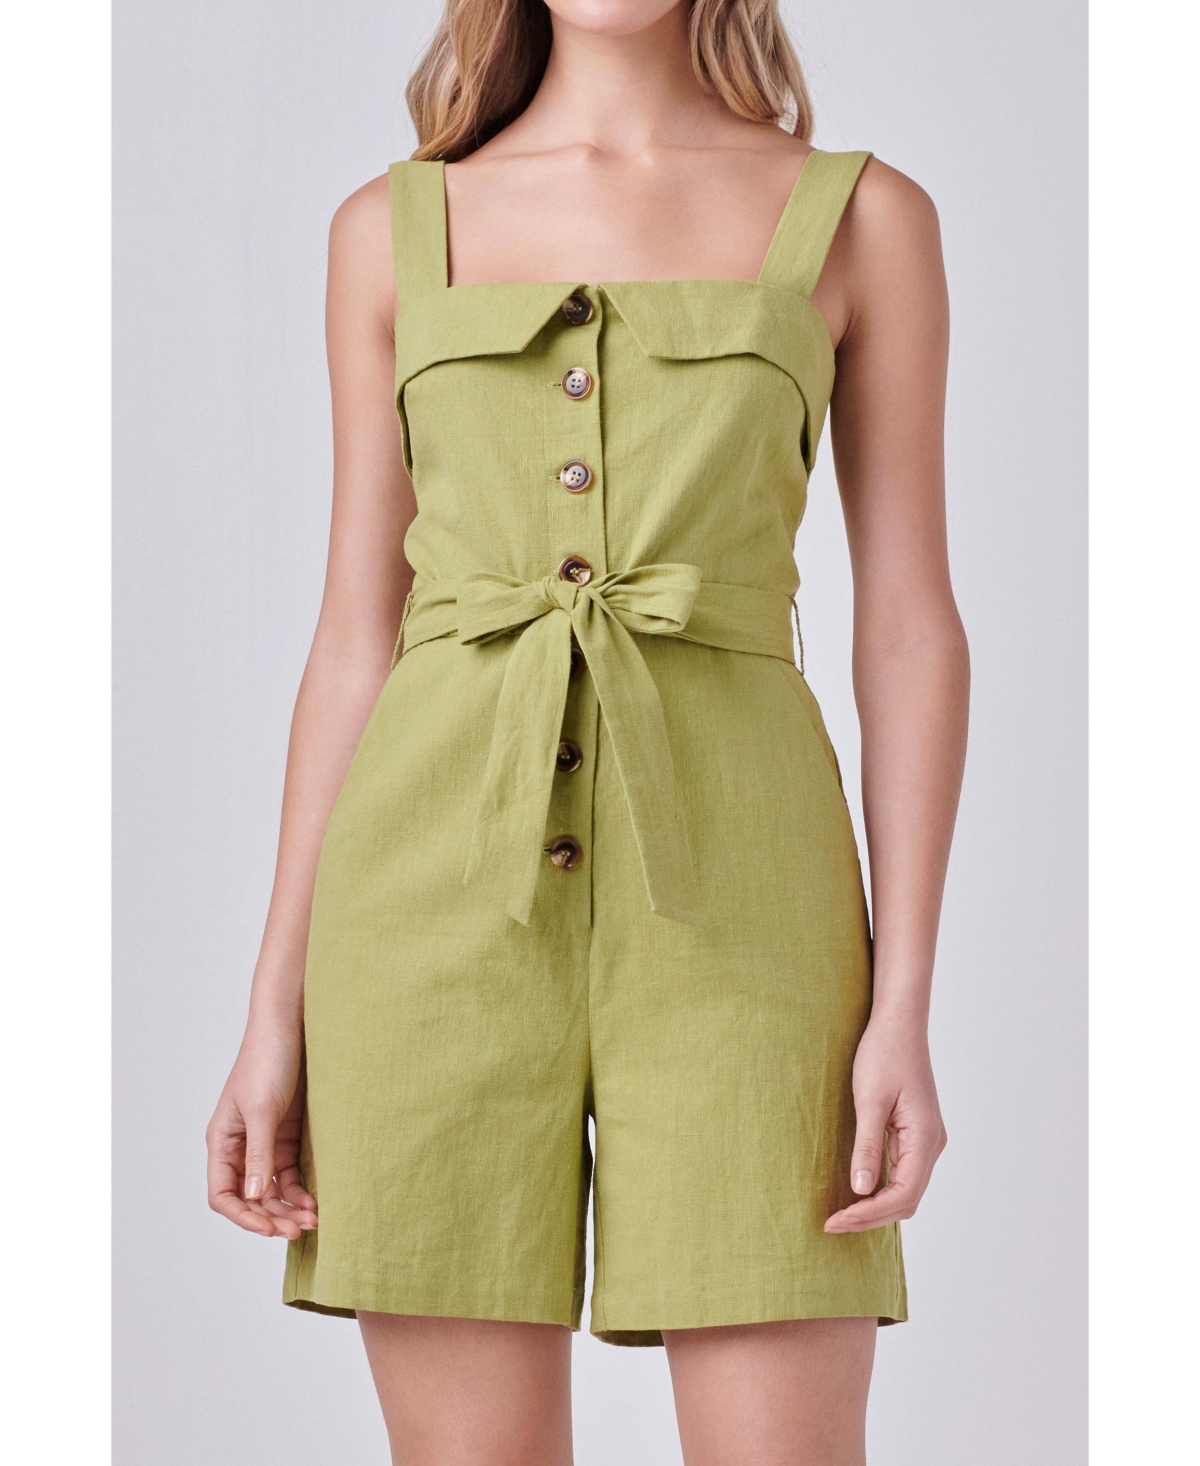 Women's Linen Romper with Self Tie and Buttons - Green